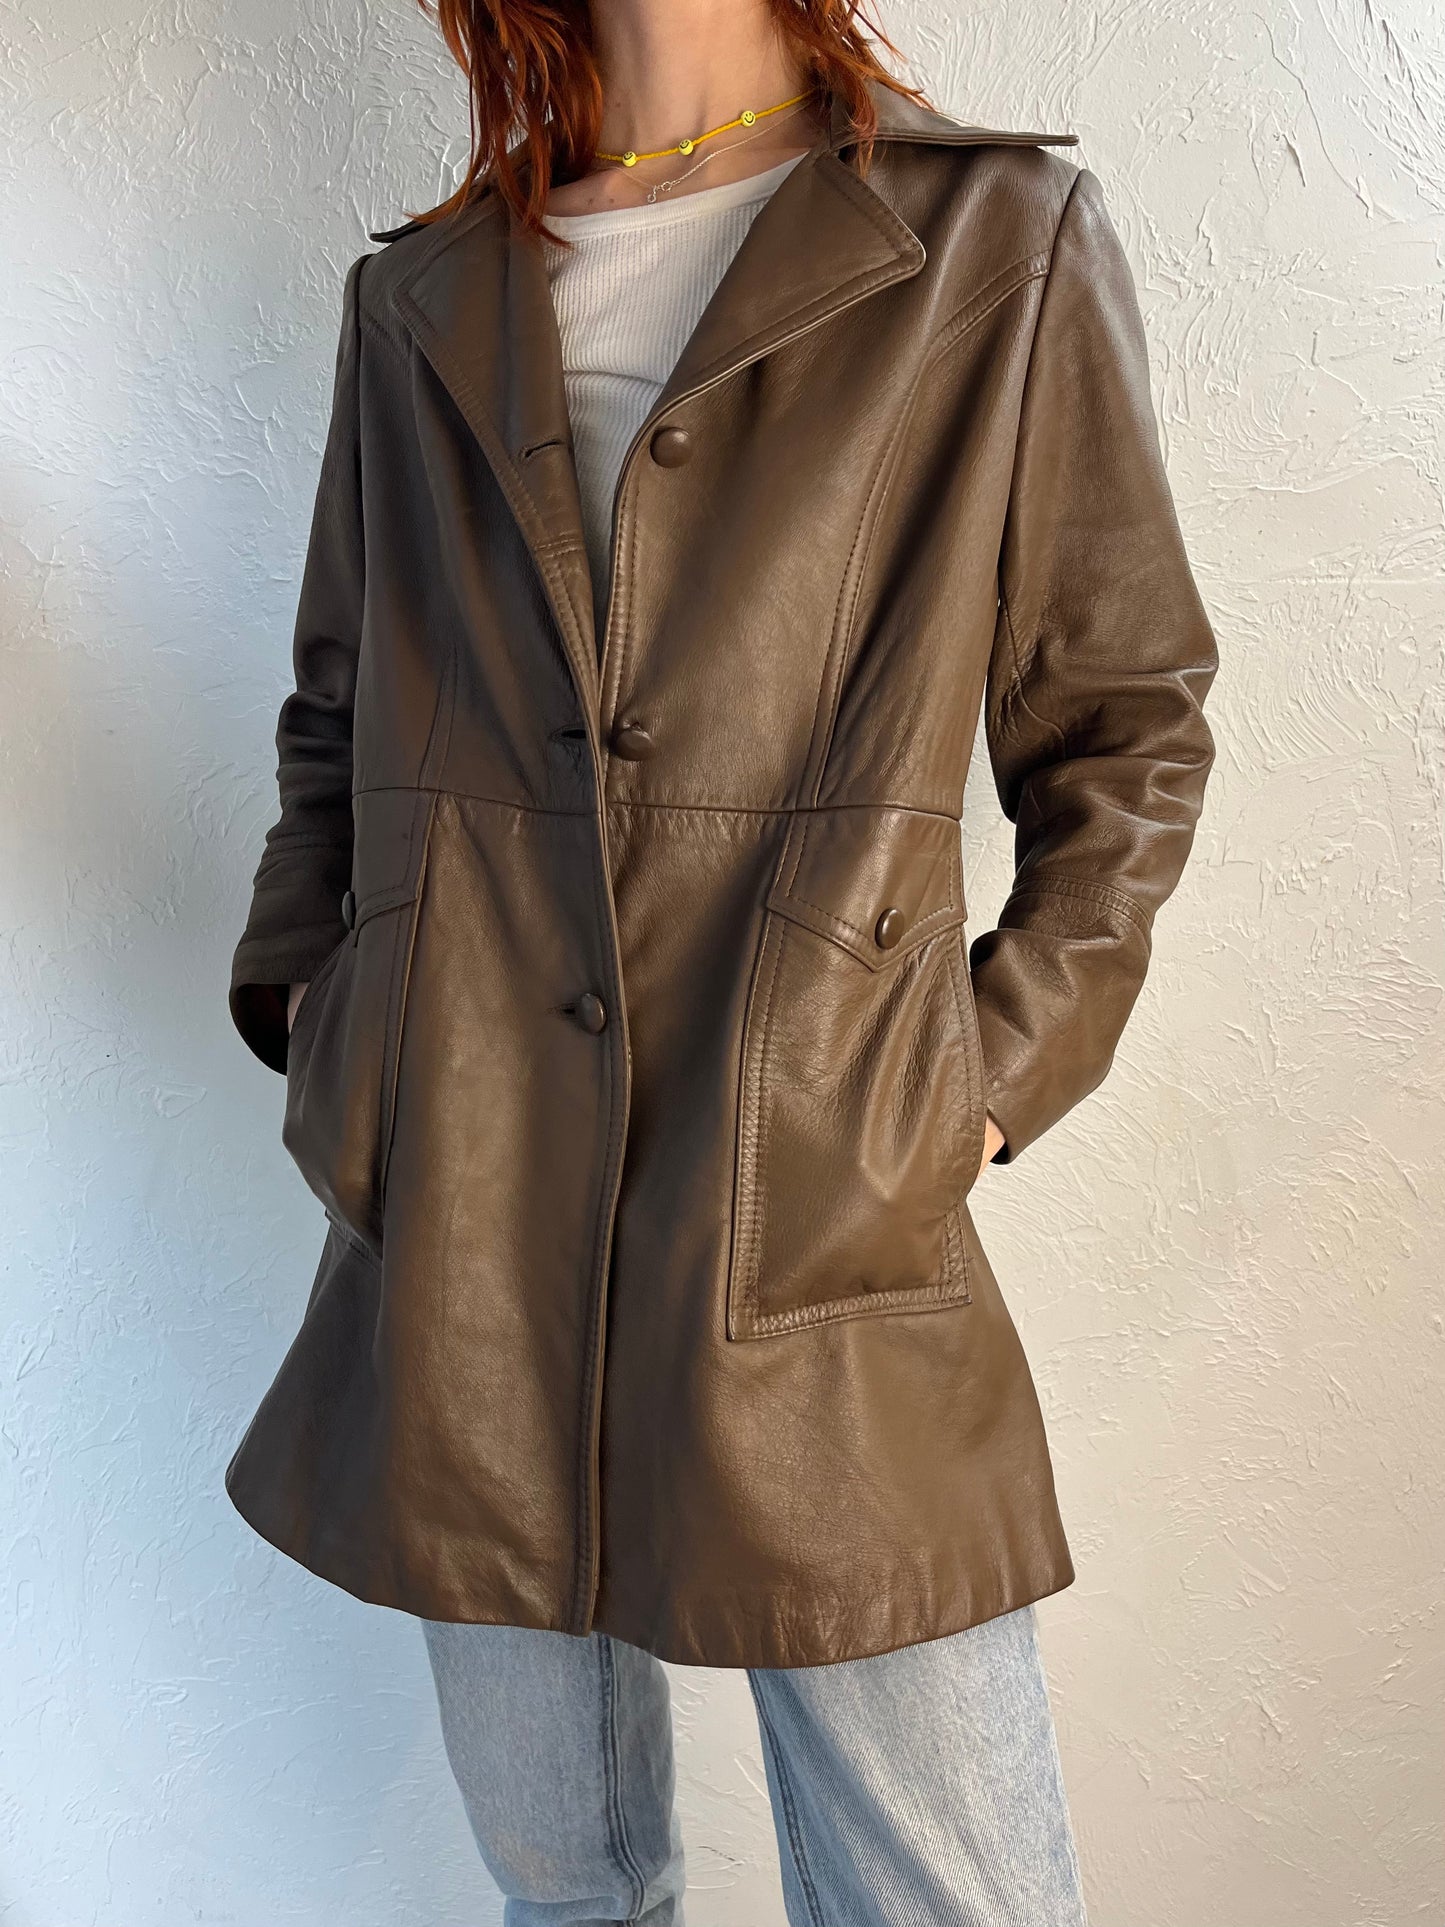 70s 80s 'Marquis' Brown Leather Half Trench Jacket / Medium